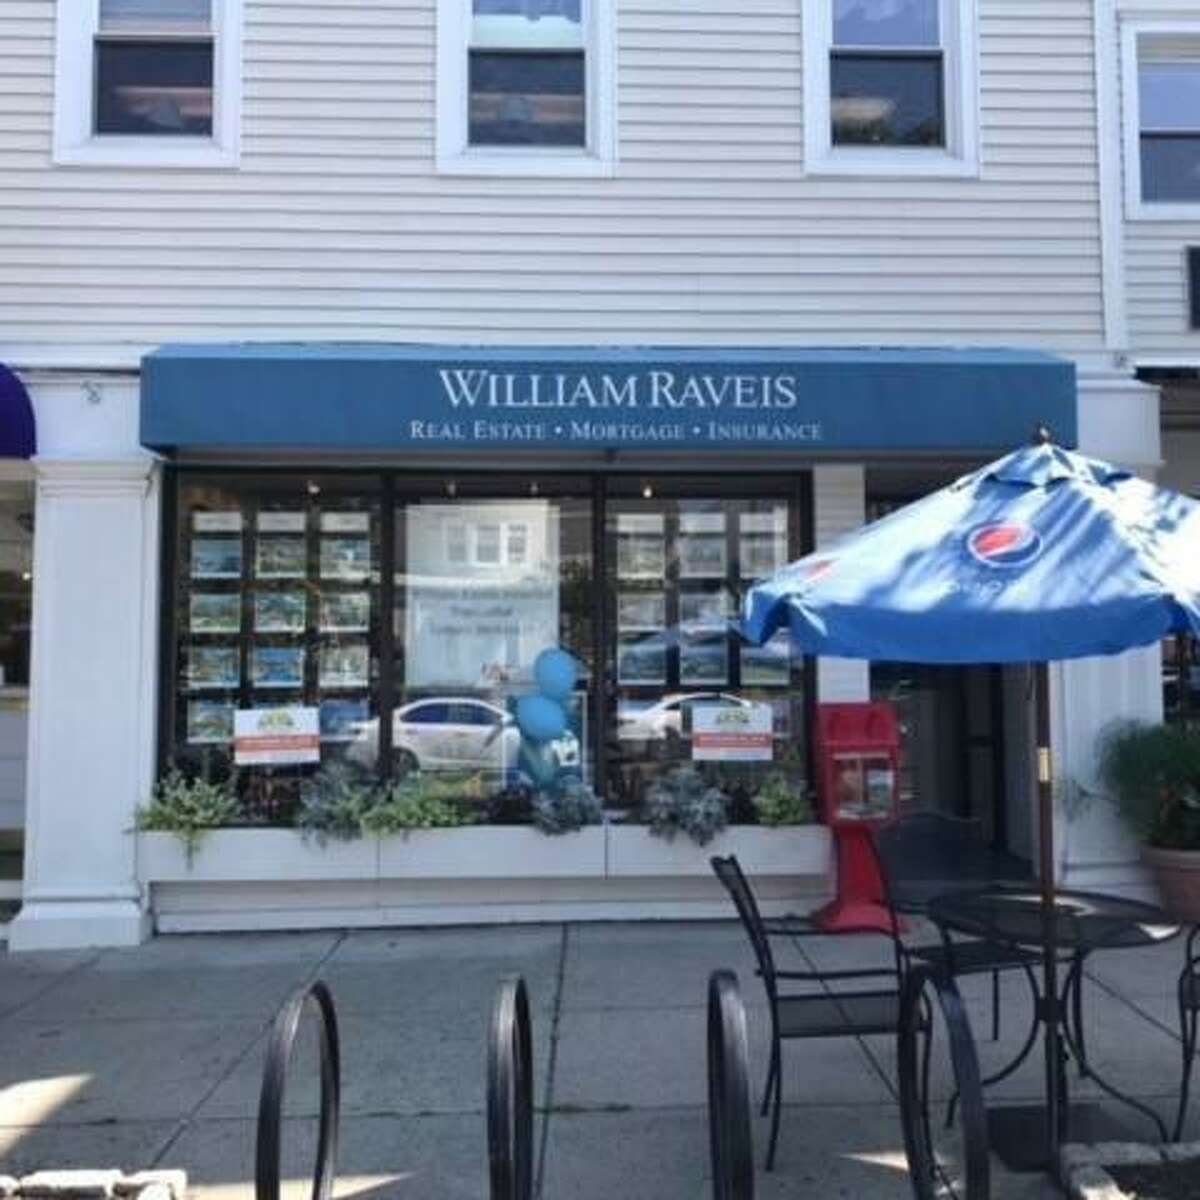 The William Raveis office located at 410 Main St. in Ridgefield has closed.